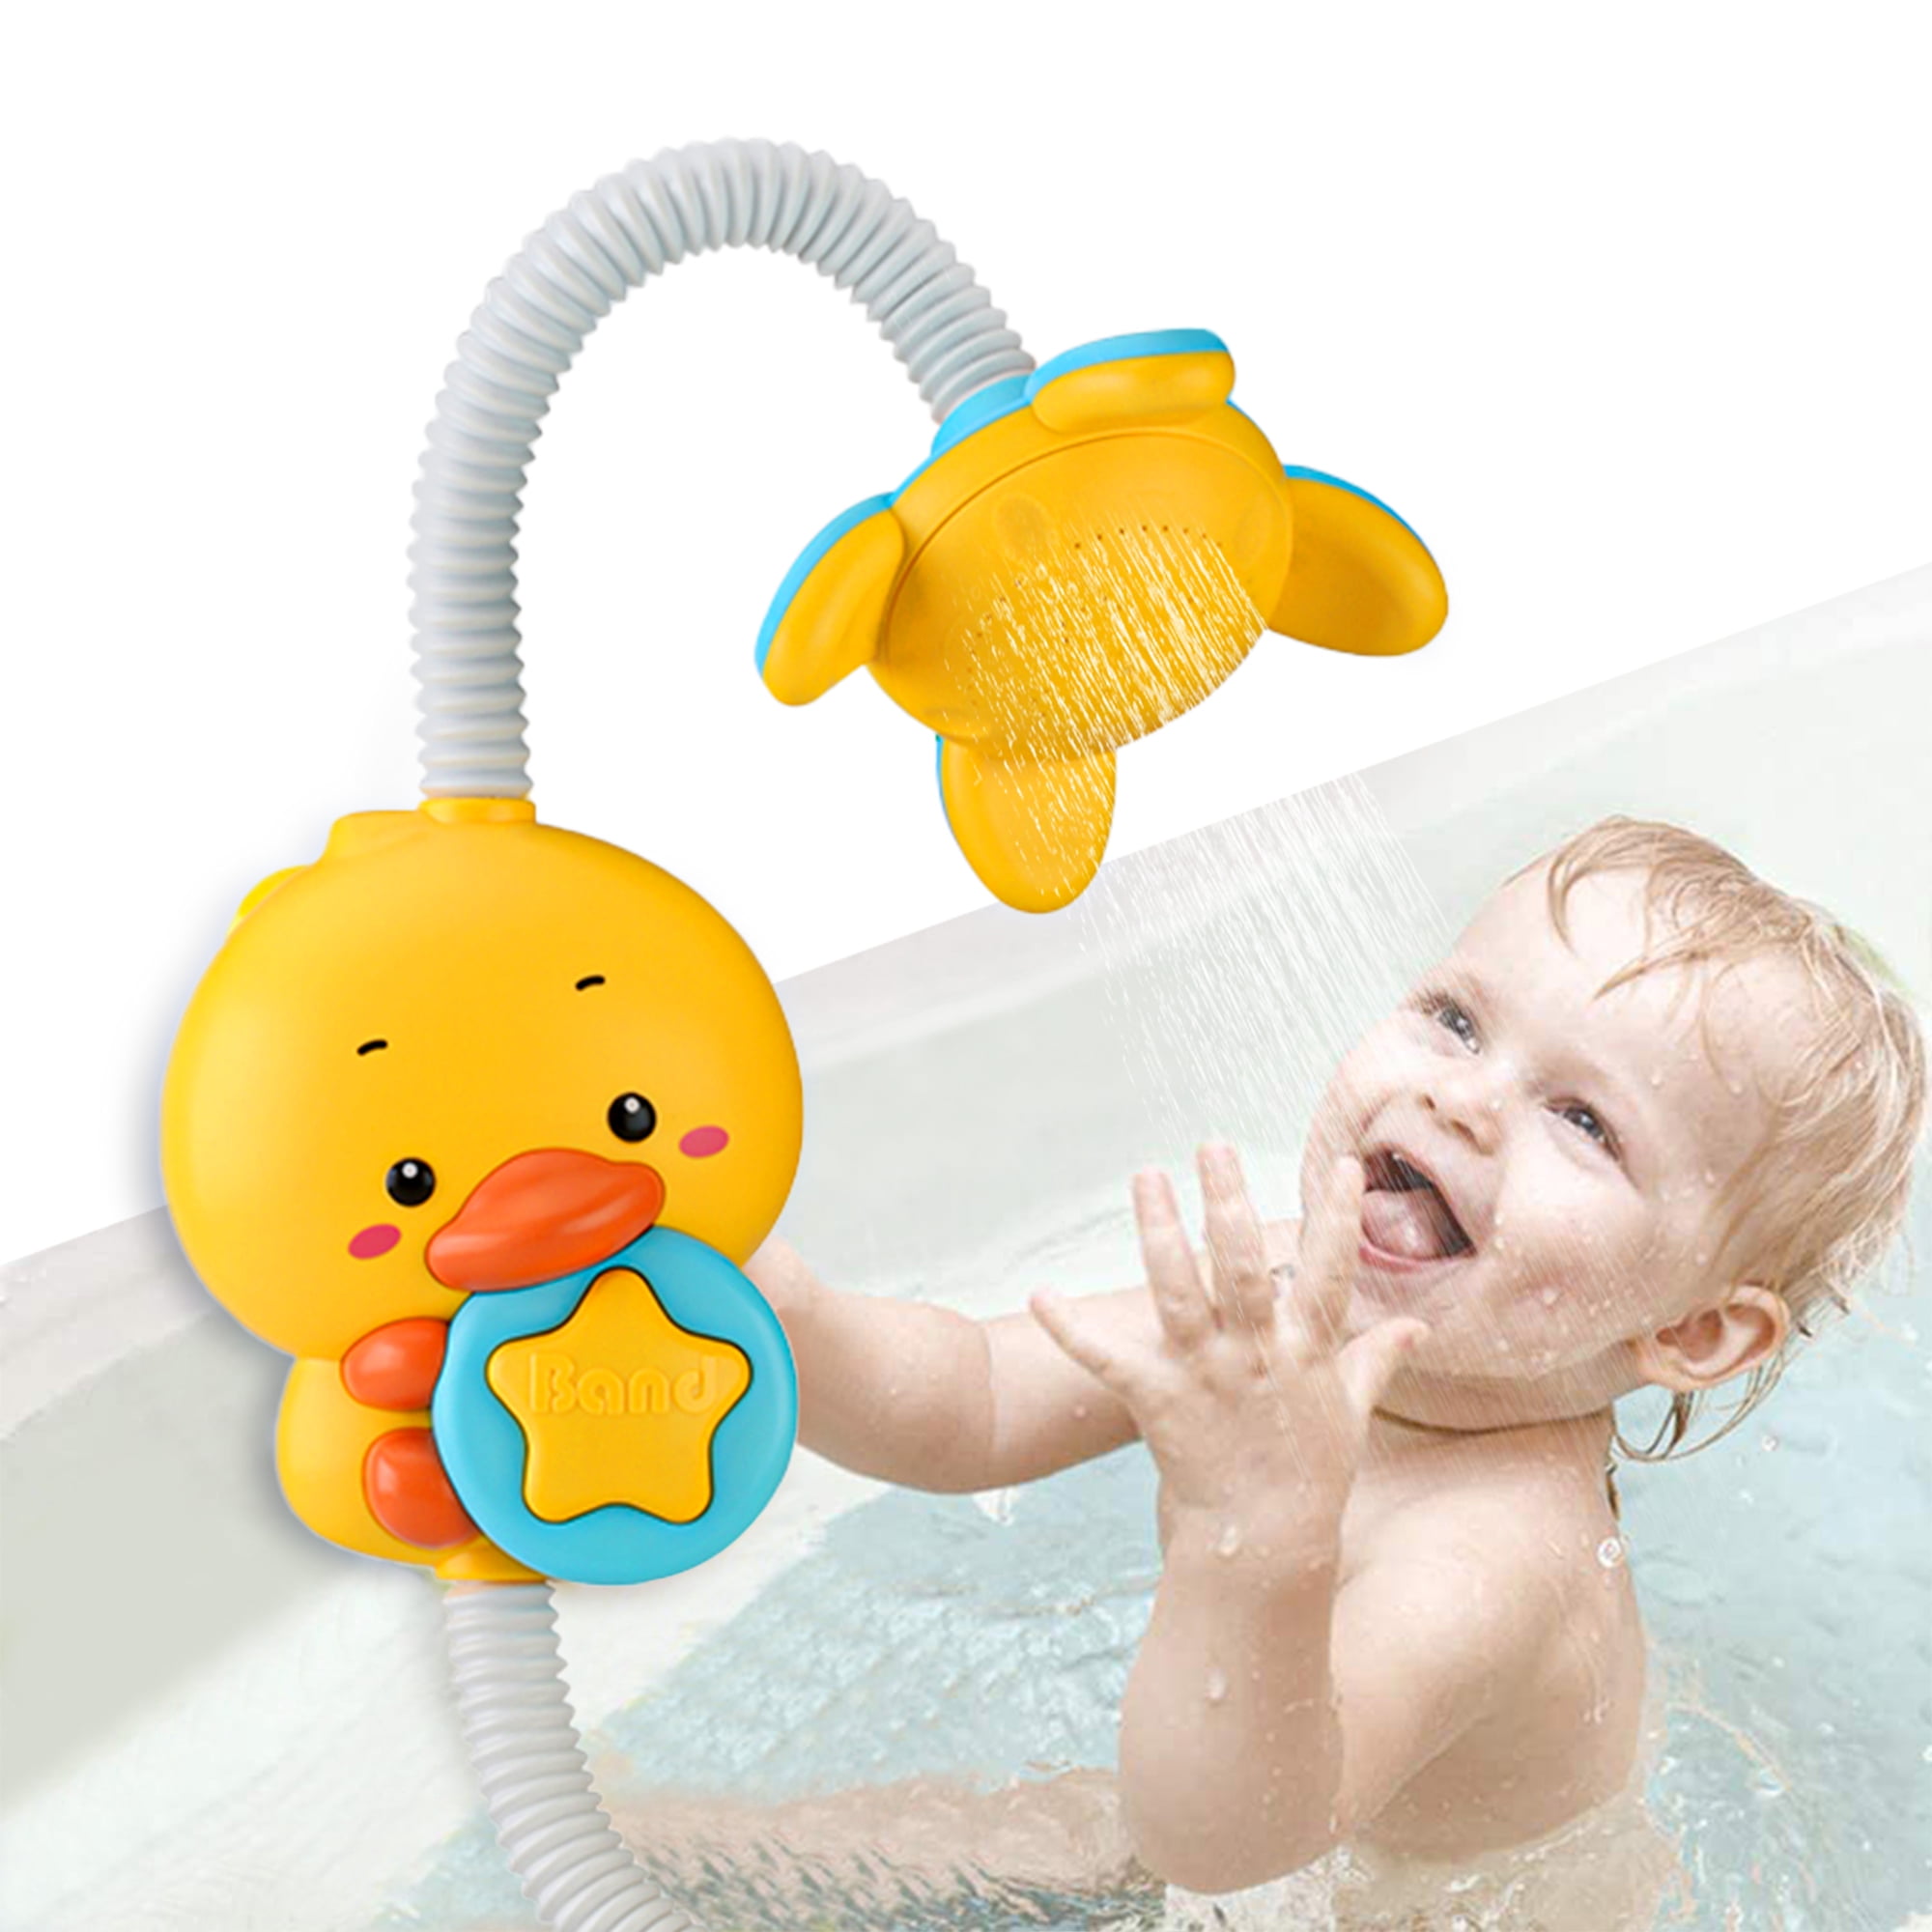 Dropship Suction Toys For Baby; Bath Toys For Kids Ages 4-8; 40pcs